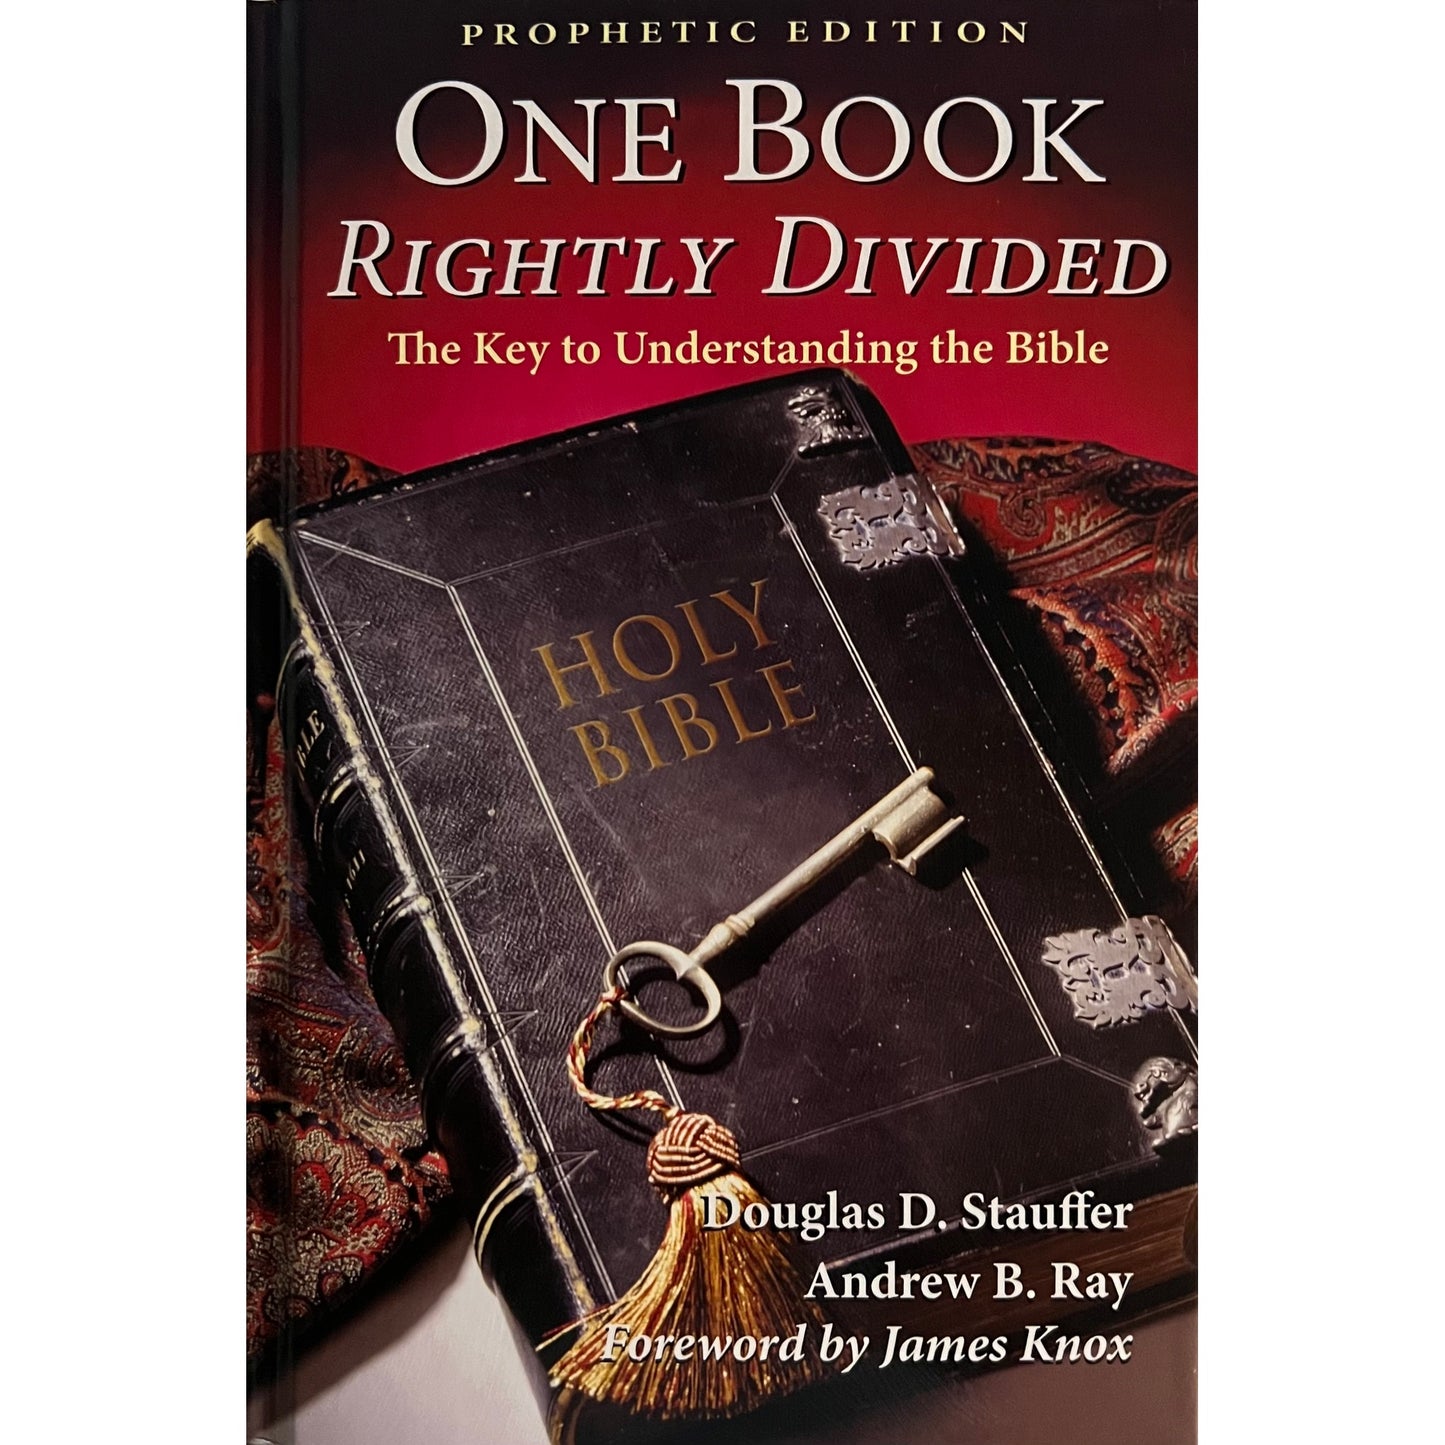 One Book Rightly Divided: The Key to Understanding the Bible (Prophetic Edition)